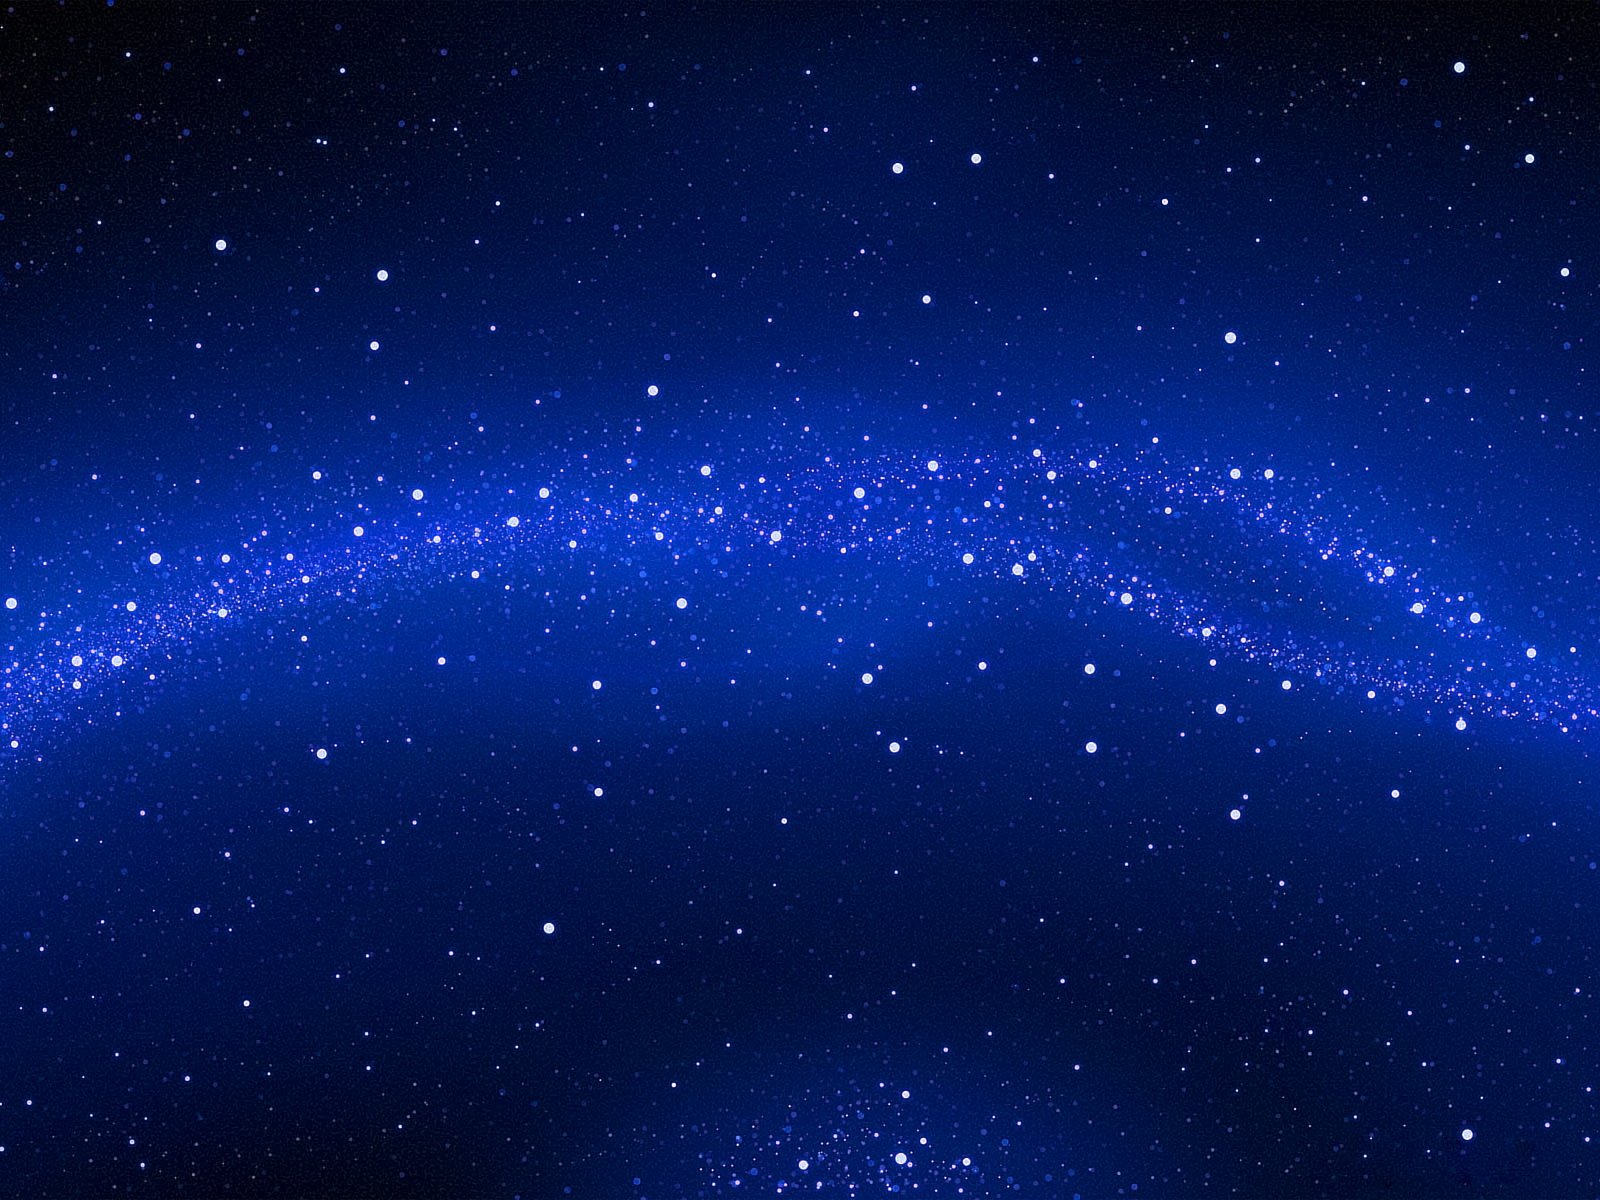 Download Star Blue Sky Wallpaper Free pictures in high definition or